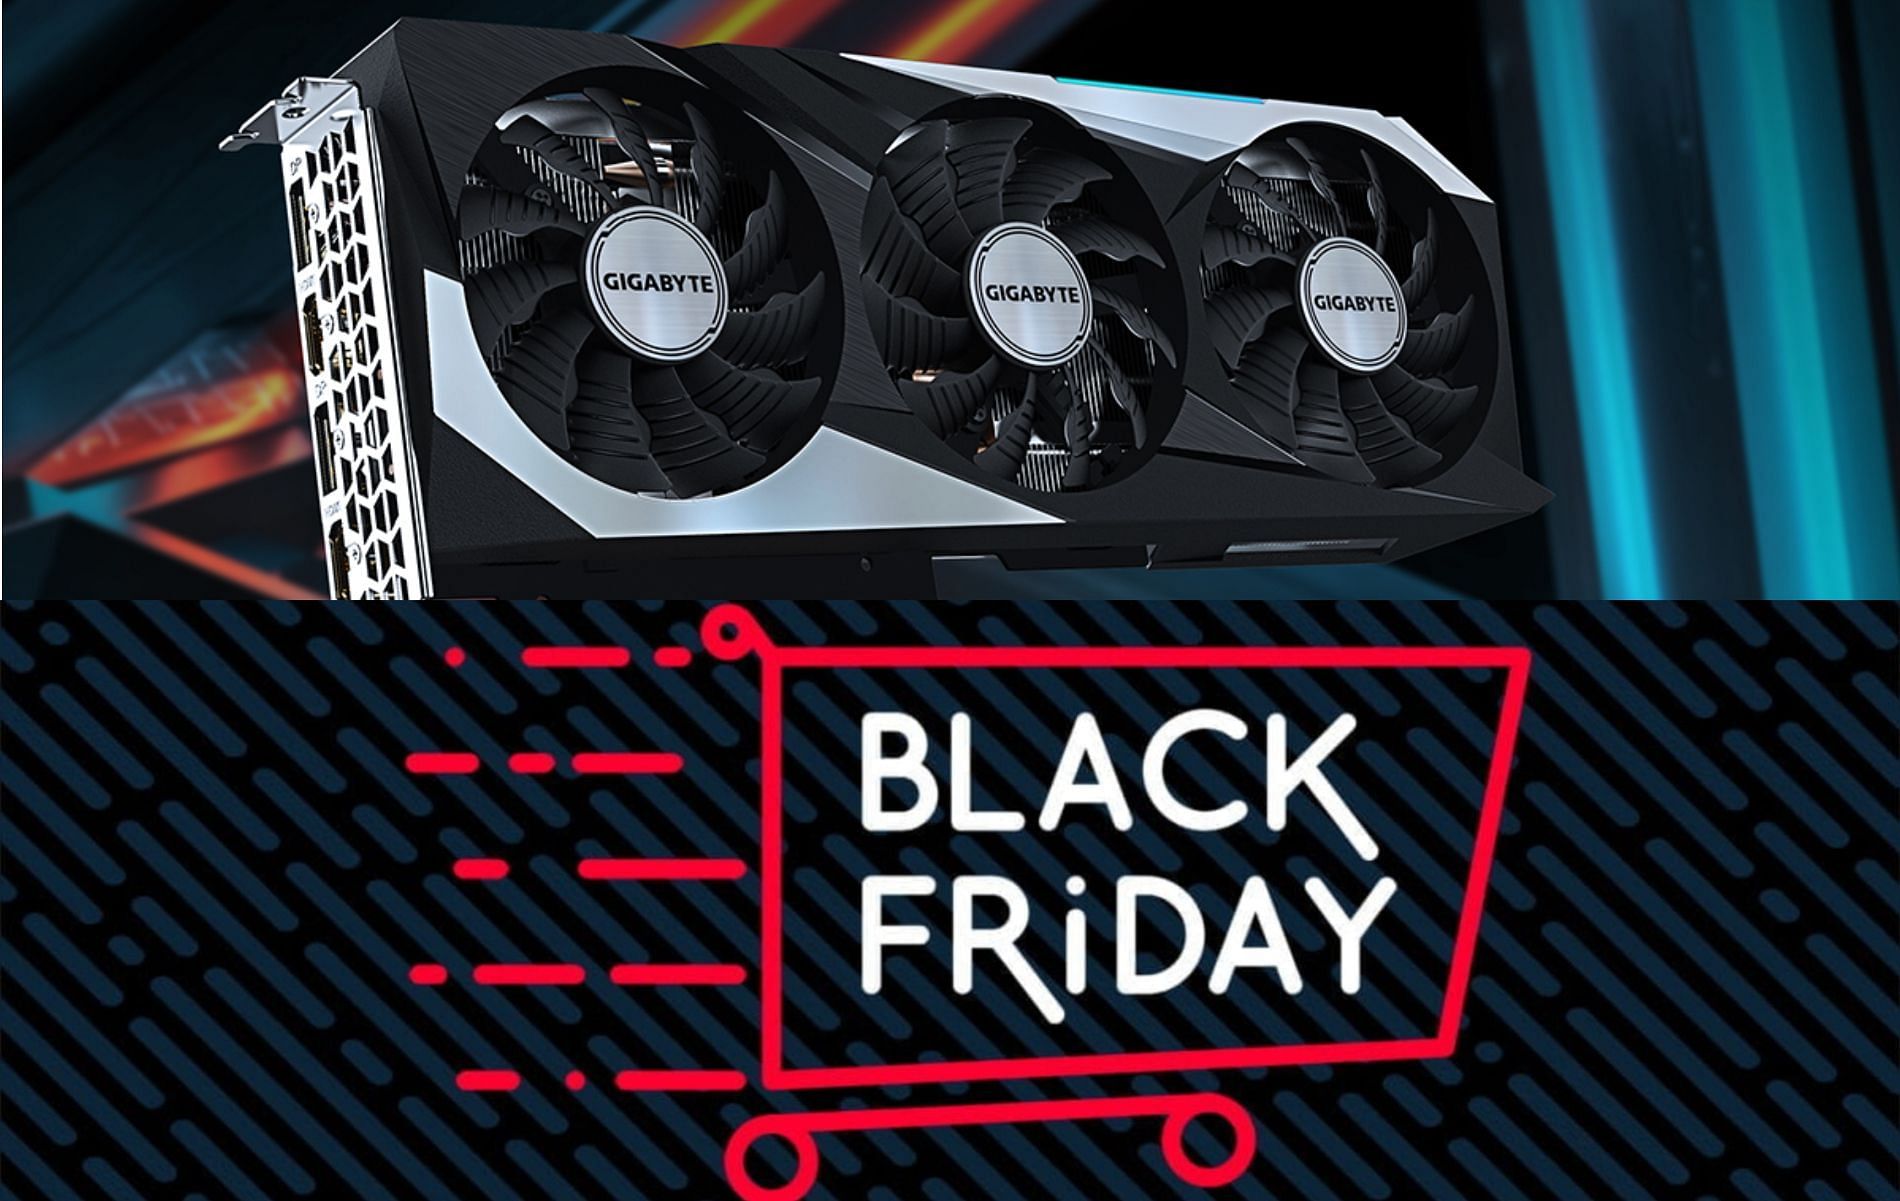 Black Friday PC deals (Image by Gigabyte)